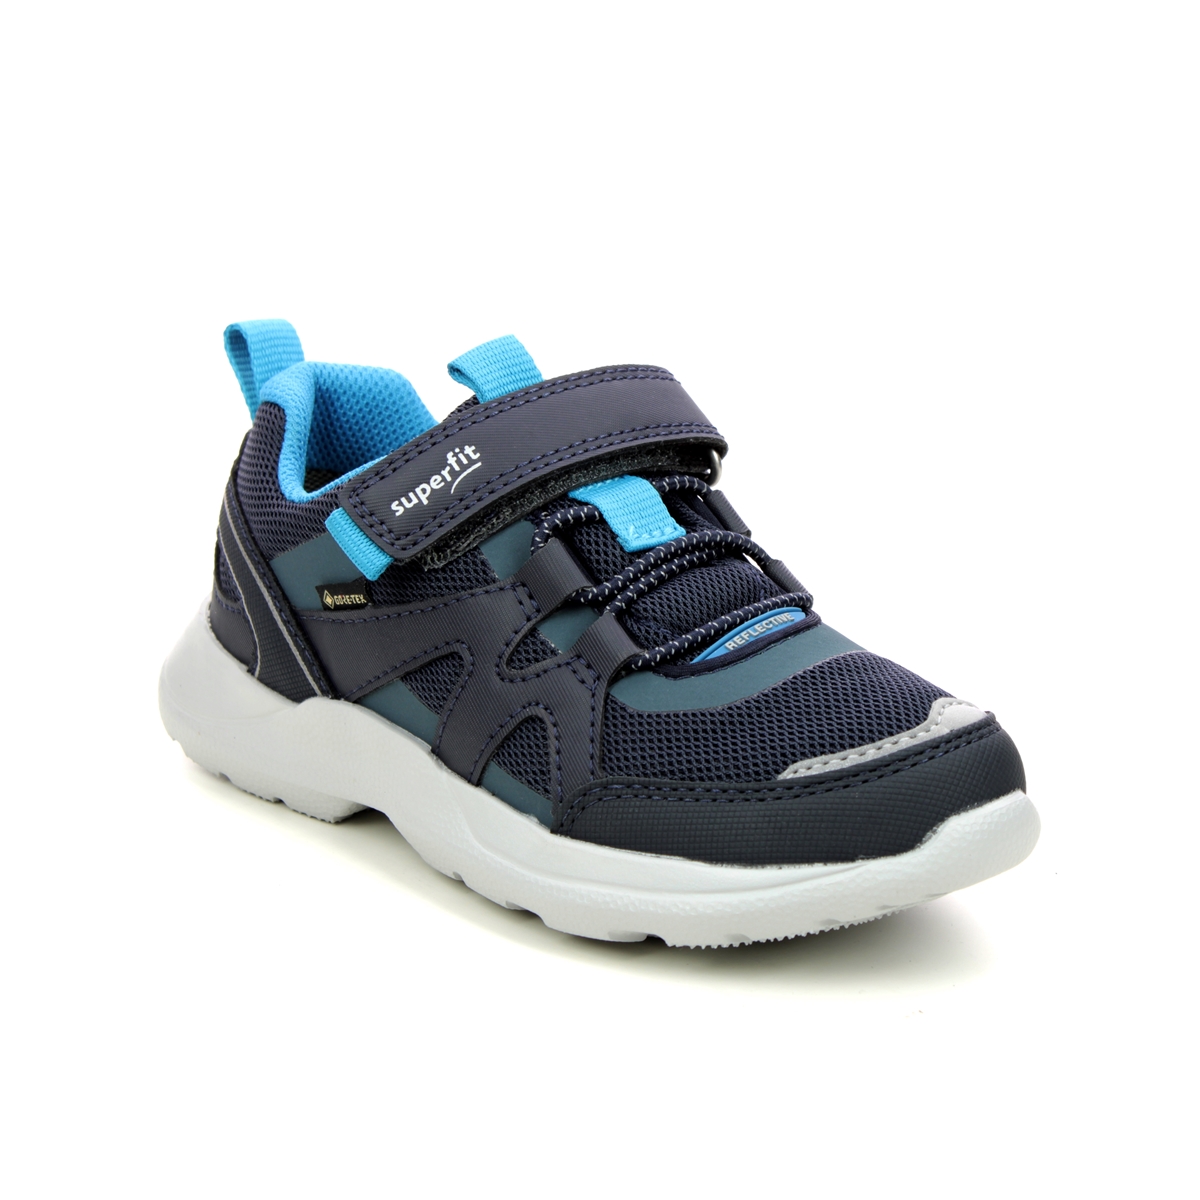 Superfit Rush Jnr B Gtx Navy Kids Trainers 1006219-8030 In Size 35 In Plain Navy For kids